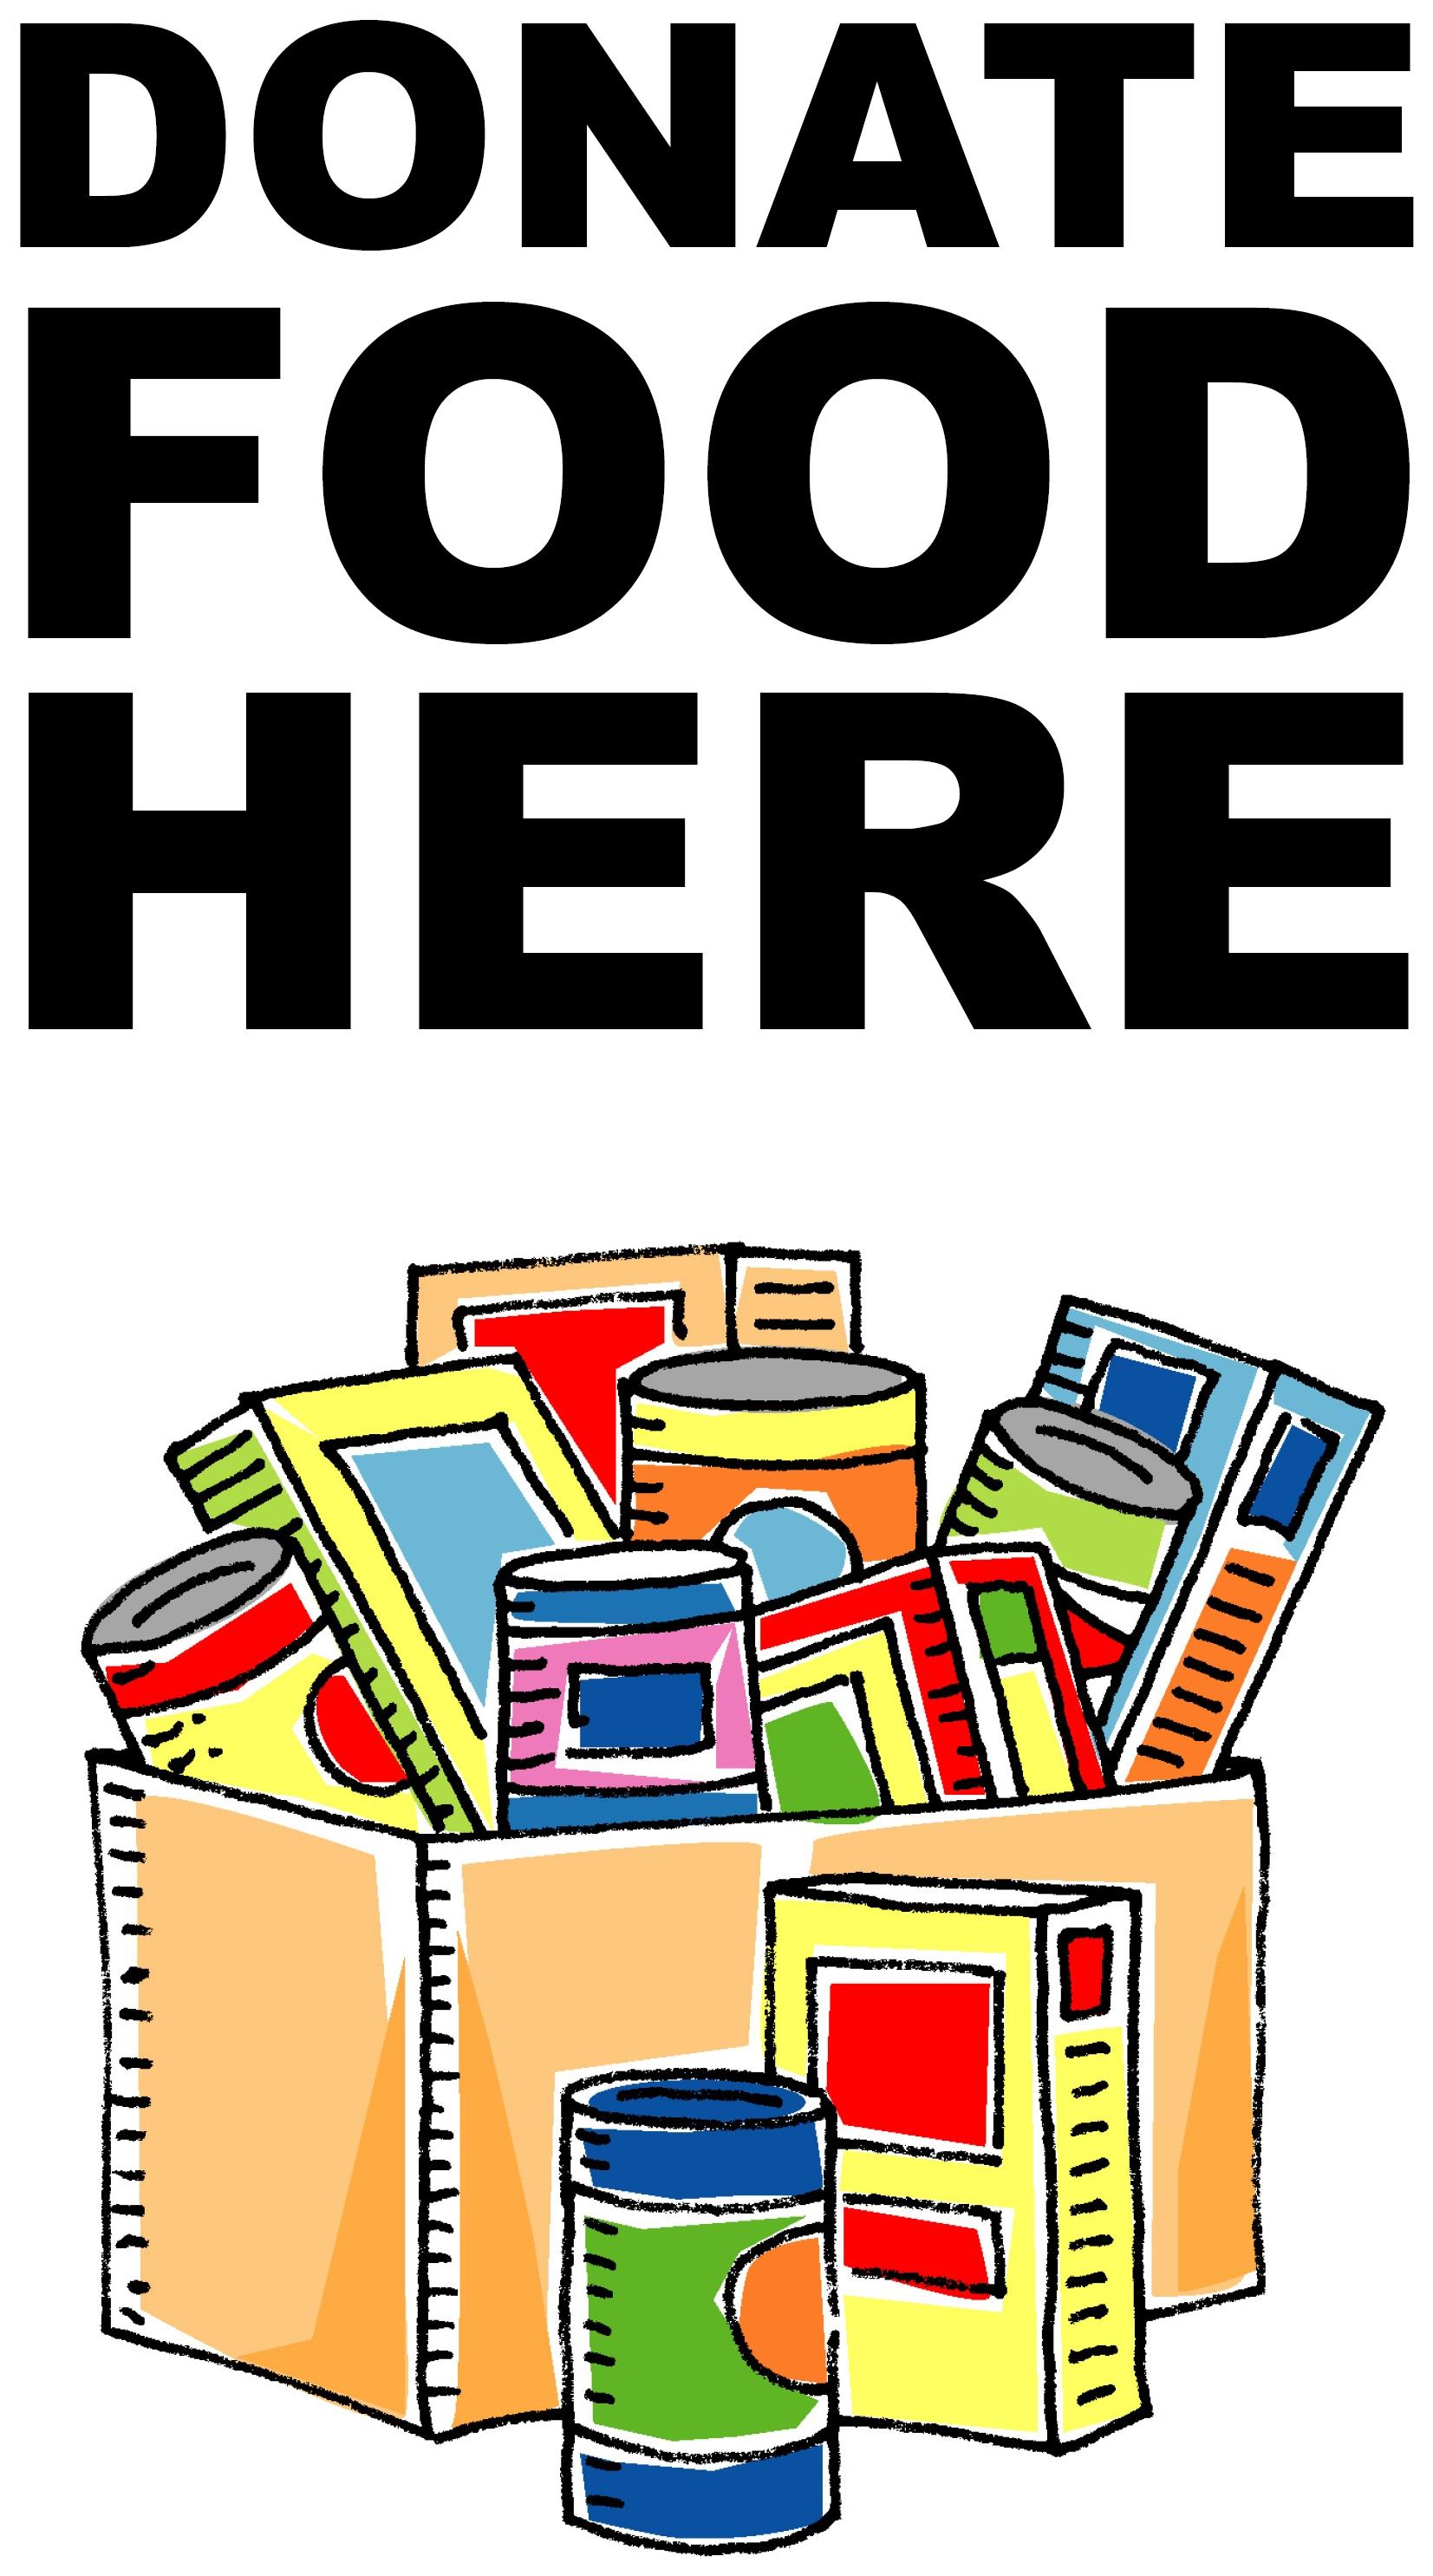 Canned Food Drive Slogans Can - Food Drive Clip Art